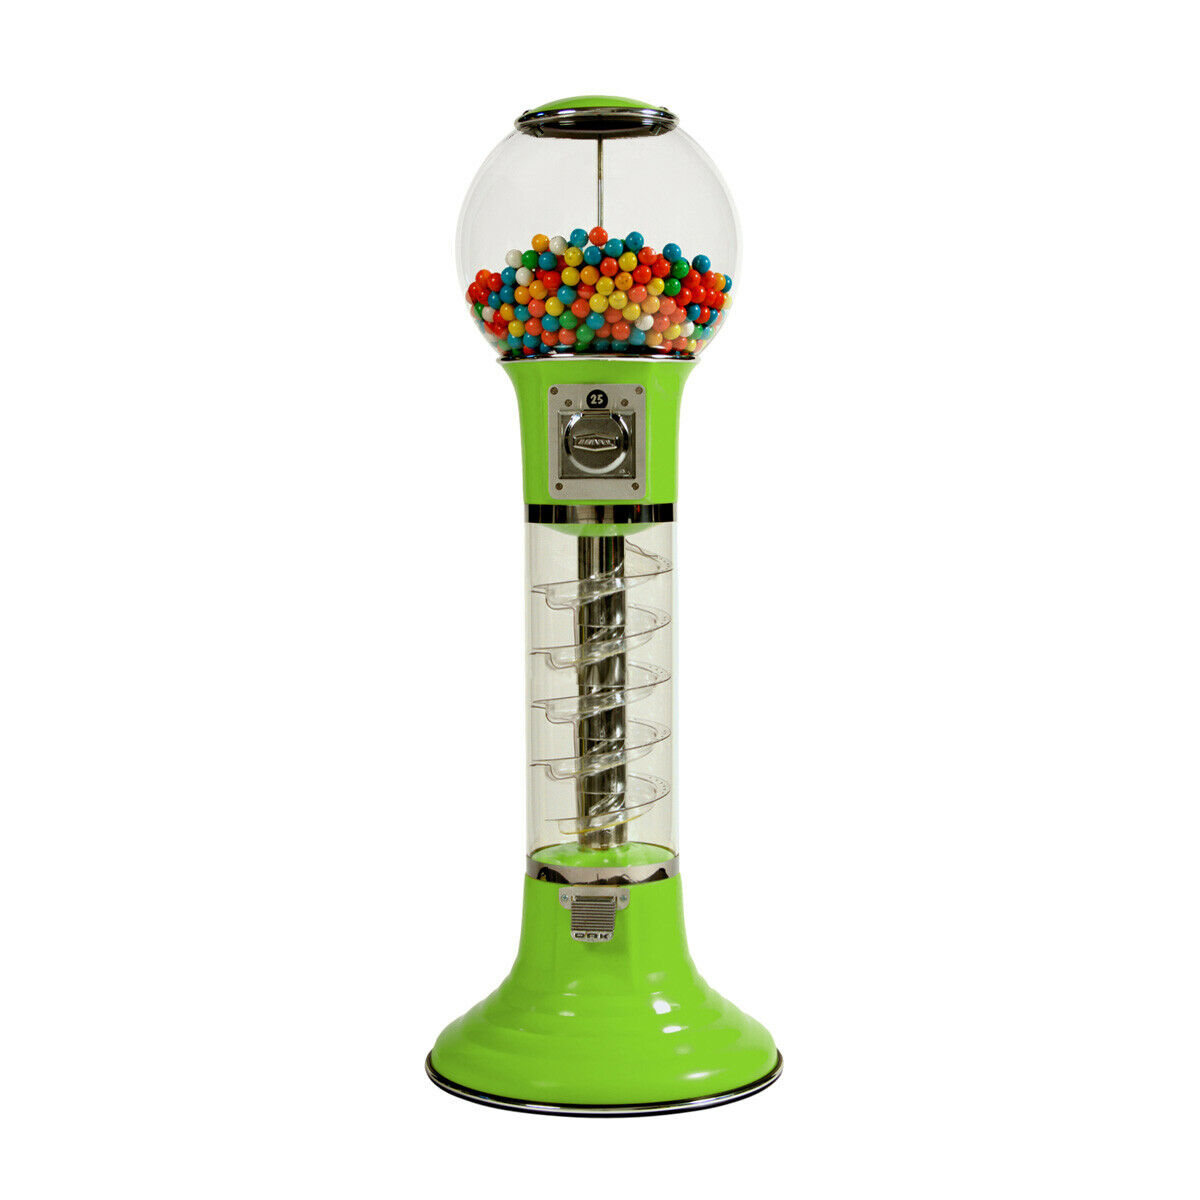 Wiz-kid Spiral Gumball Machine, Green, Yellow Track Color, Free Play